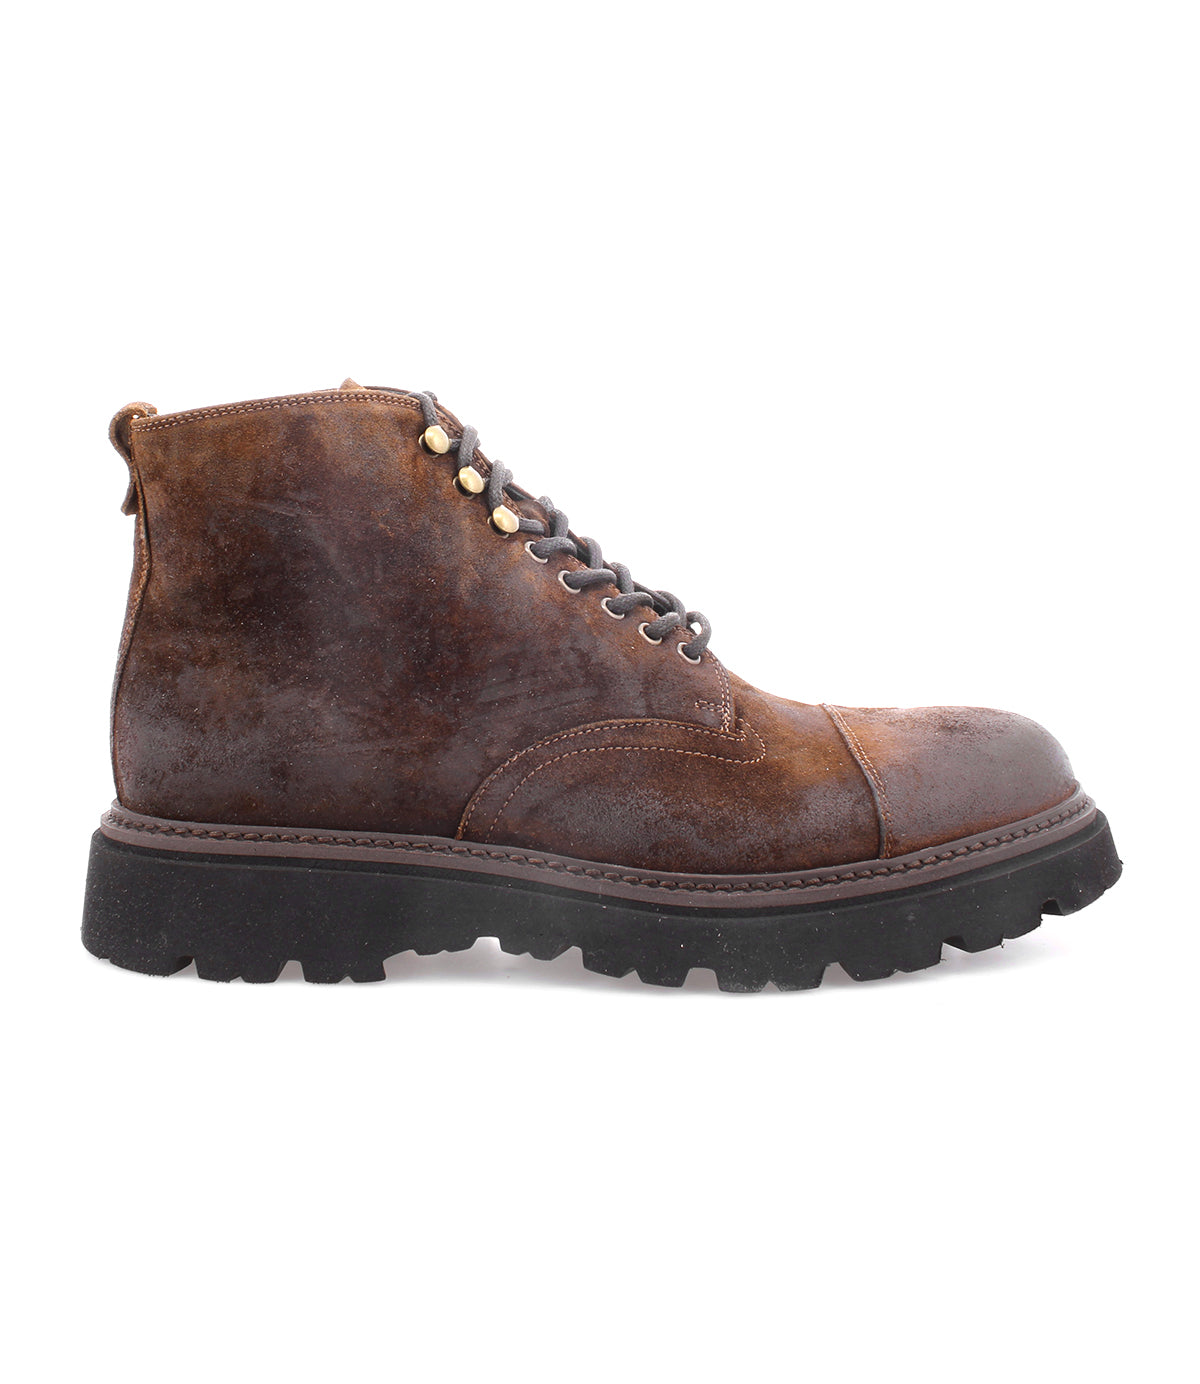 An Italian Goer work-style boot in oiled suede leather, featuring black soles for added durability, by Bed Stu.